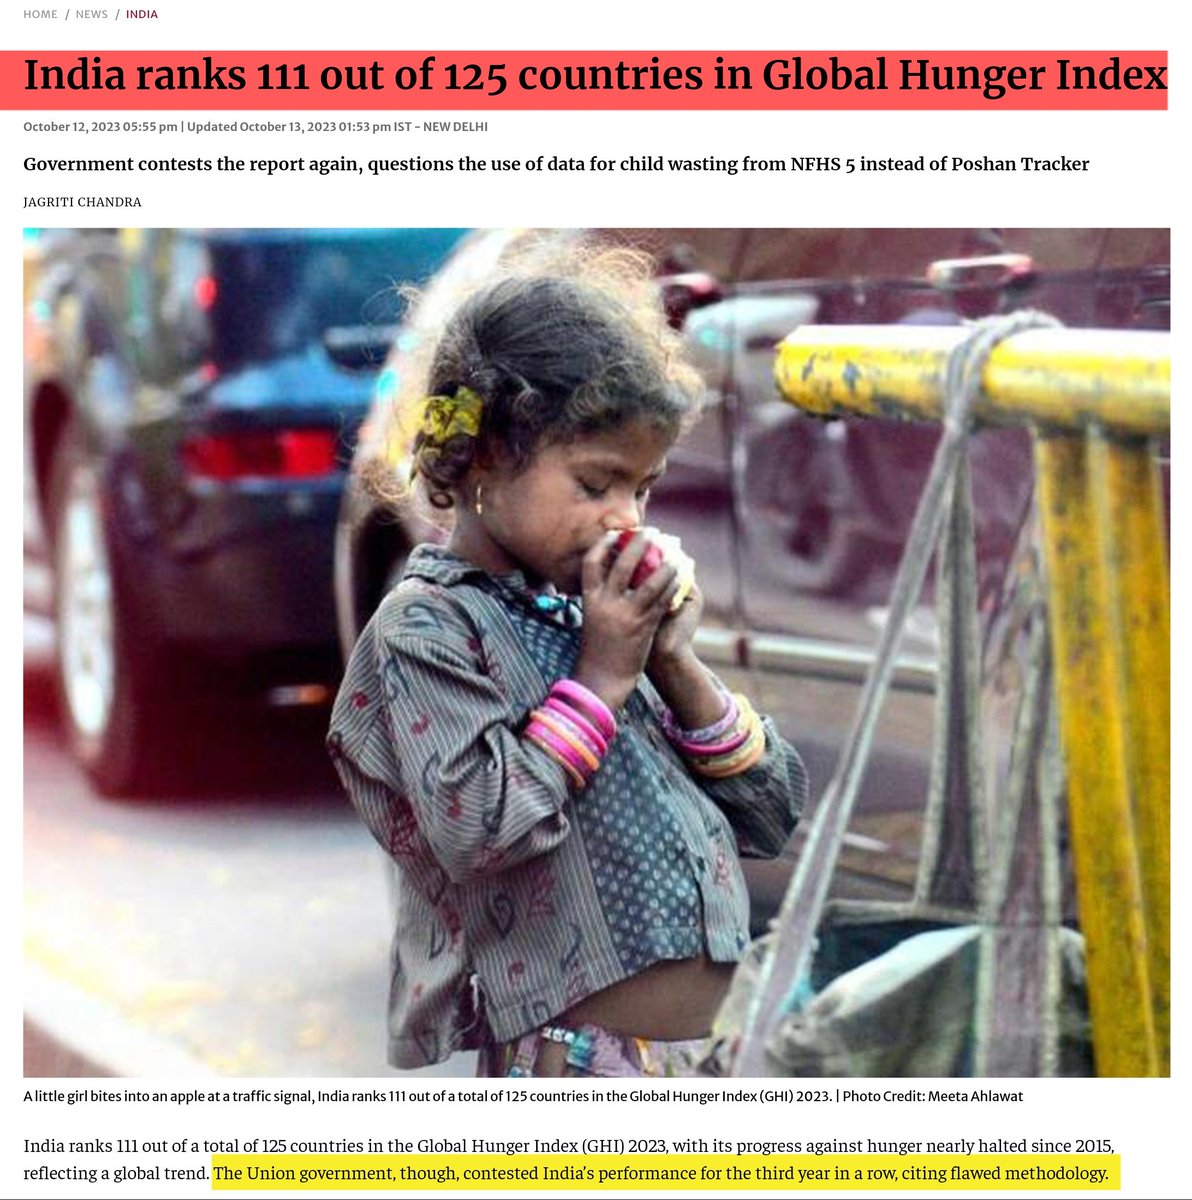 If India's neighbouring countries are performing better than India then there needs to work on this issue rather citing GHI 2023 as flawed.

This should be most debatle issue in India.

Source: The Hindu

#GHI2023 #Hunger #India